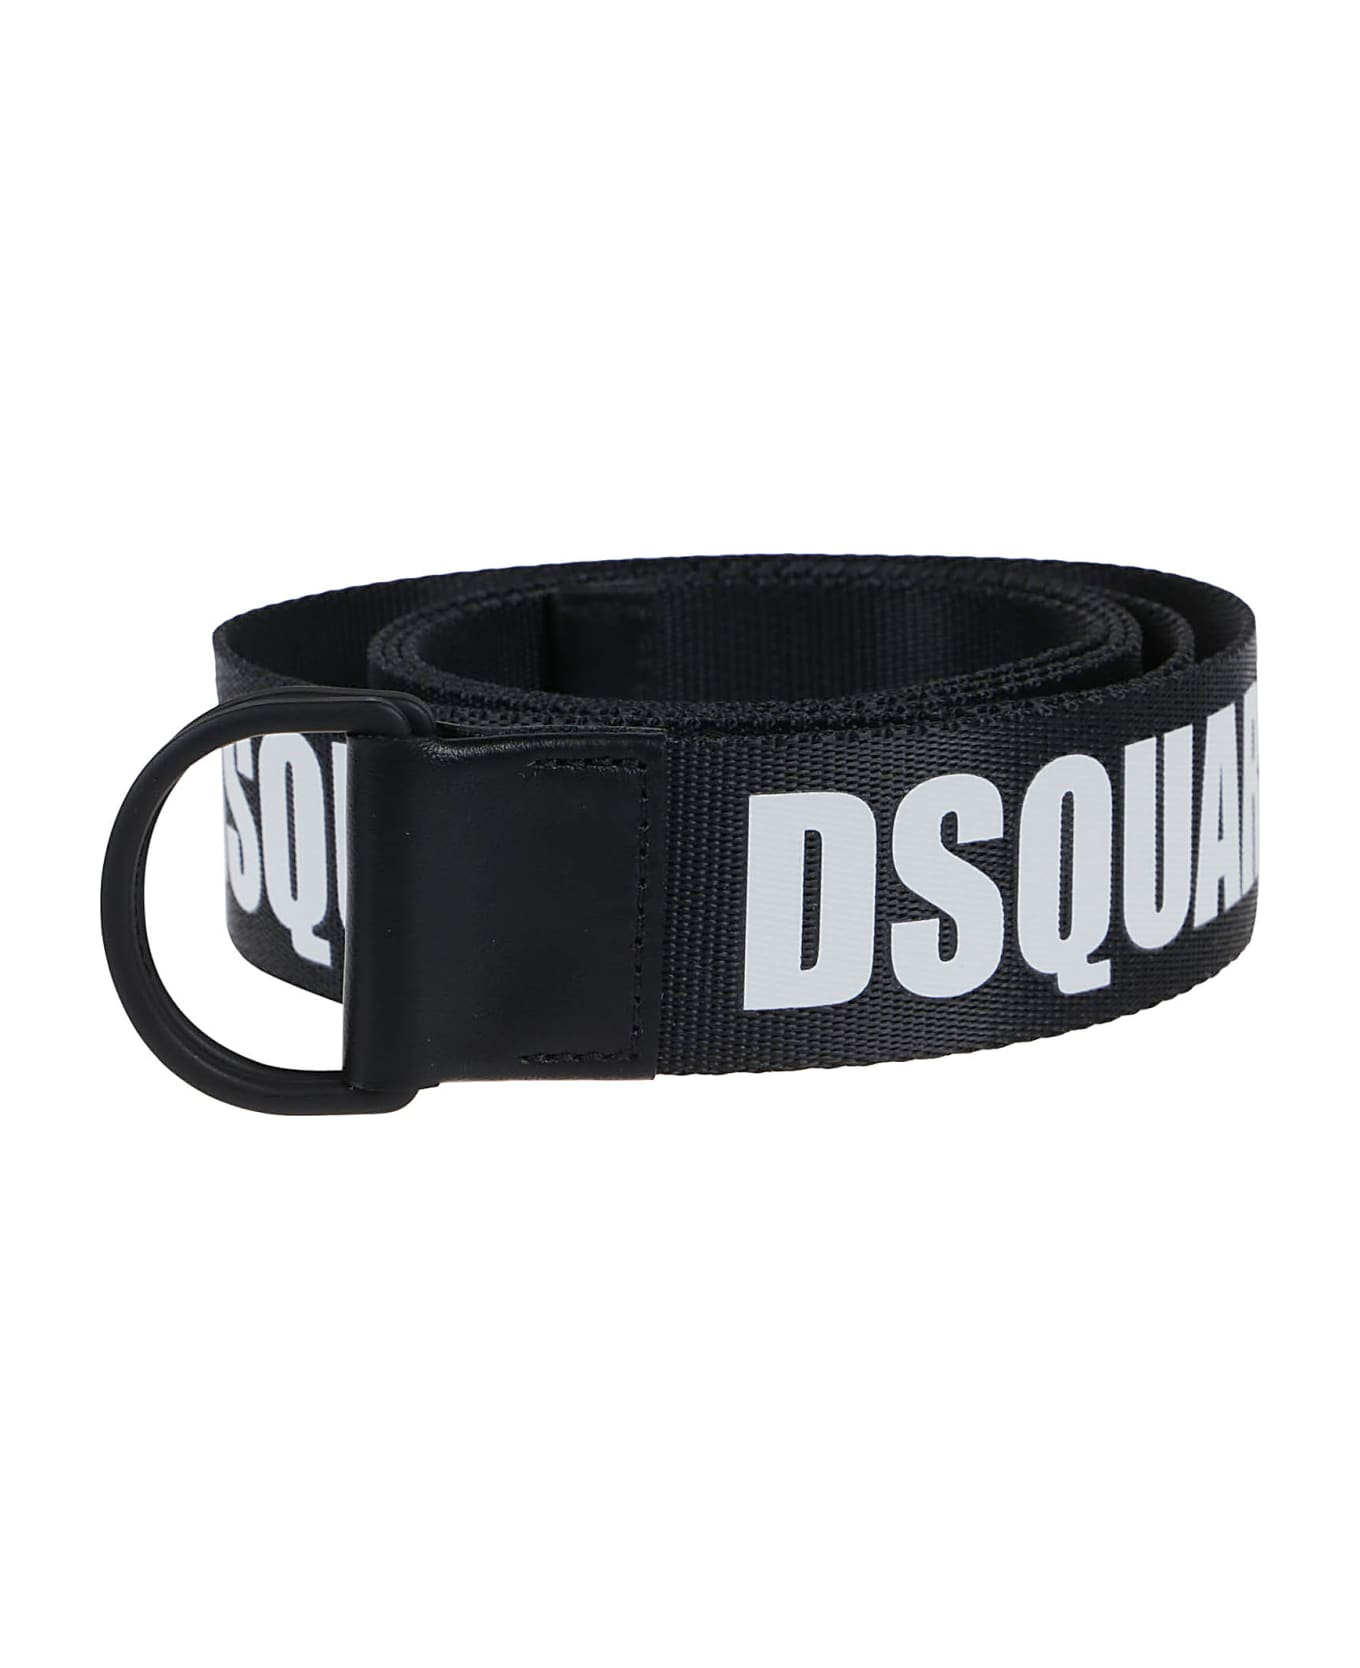 Dsquared2 Logo Made With Love Ribbon Belt - Nero